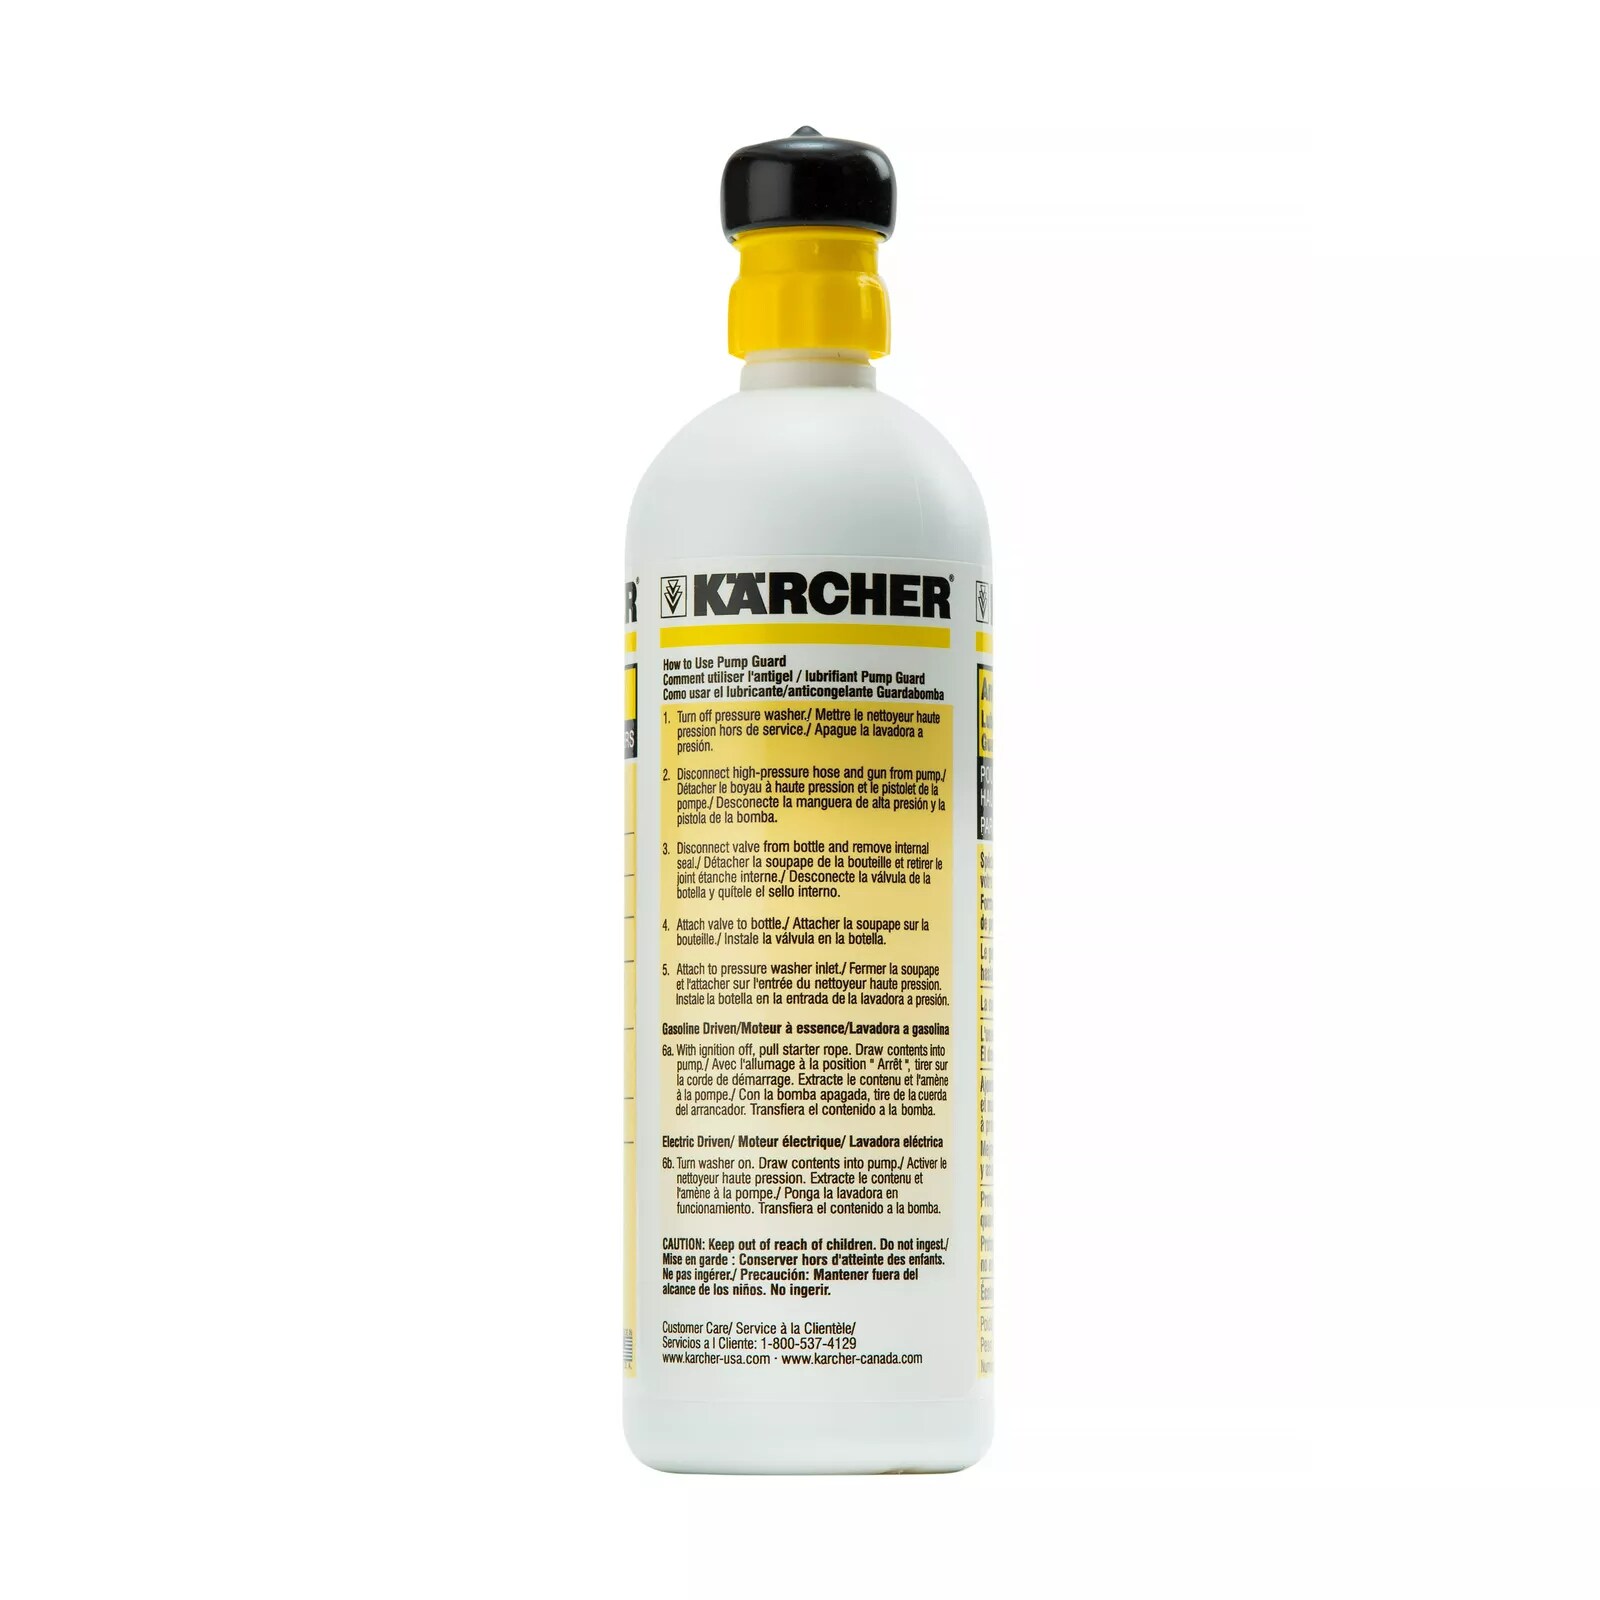 Karcher Pressure Washer Pump Saver - 16 oz. Bottle - Protects Against  Corrosion, Freezing, and Premature Wear in the Pump Saver department at